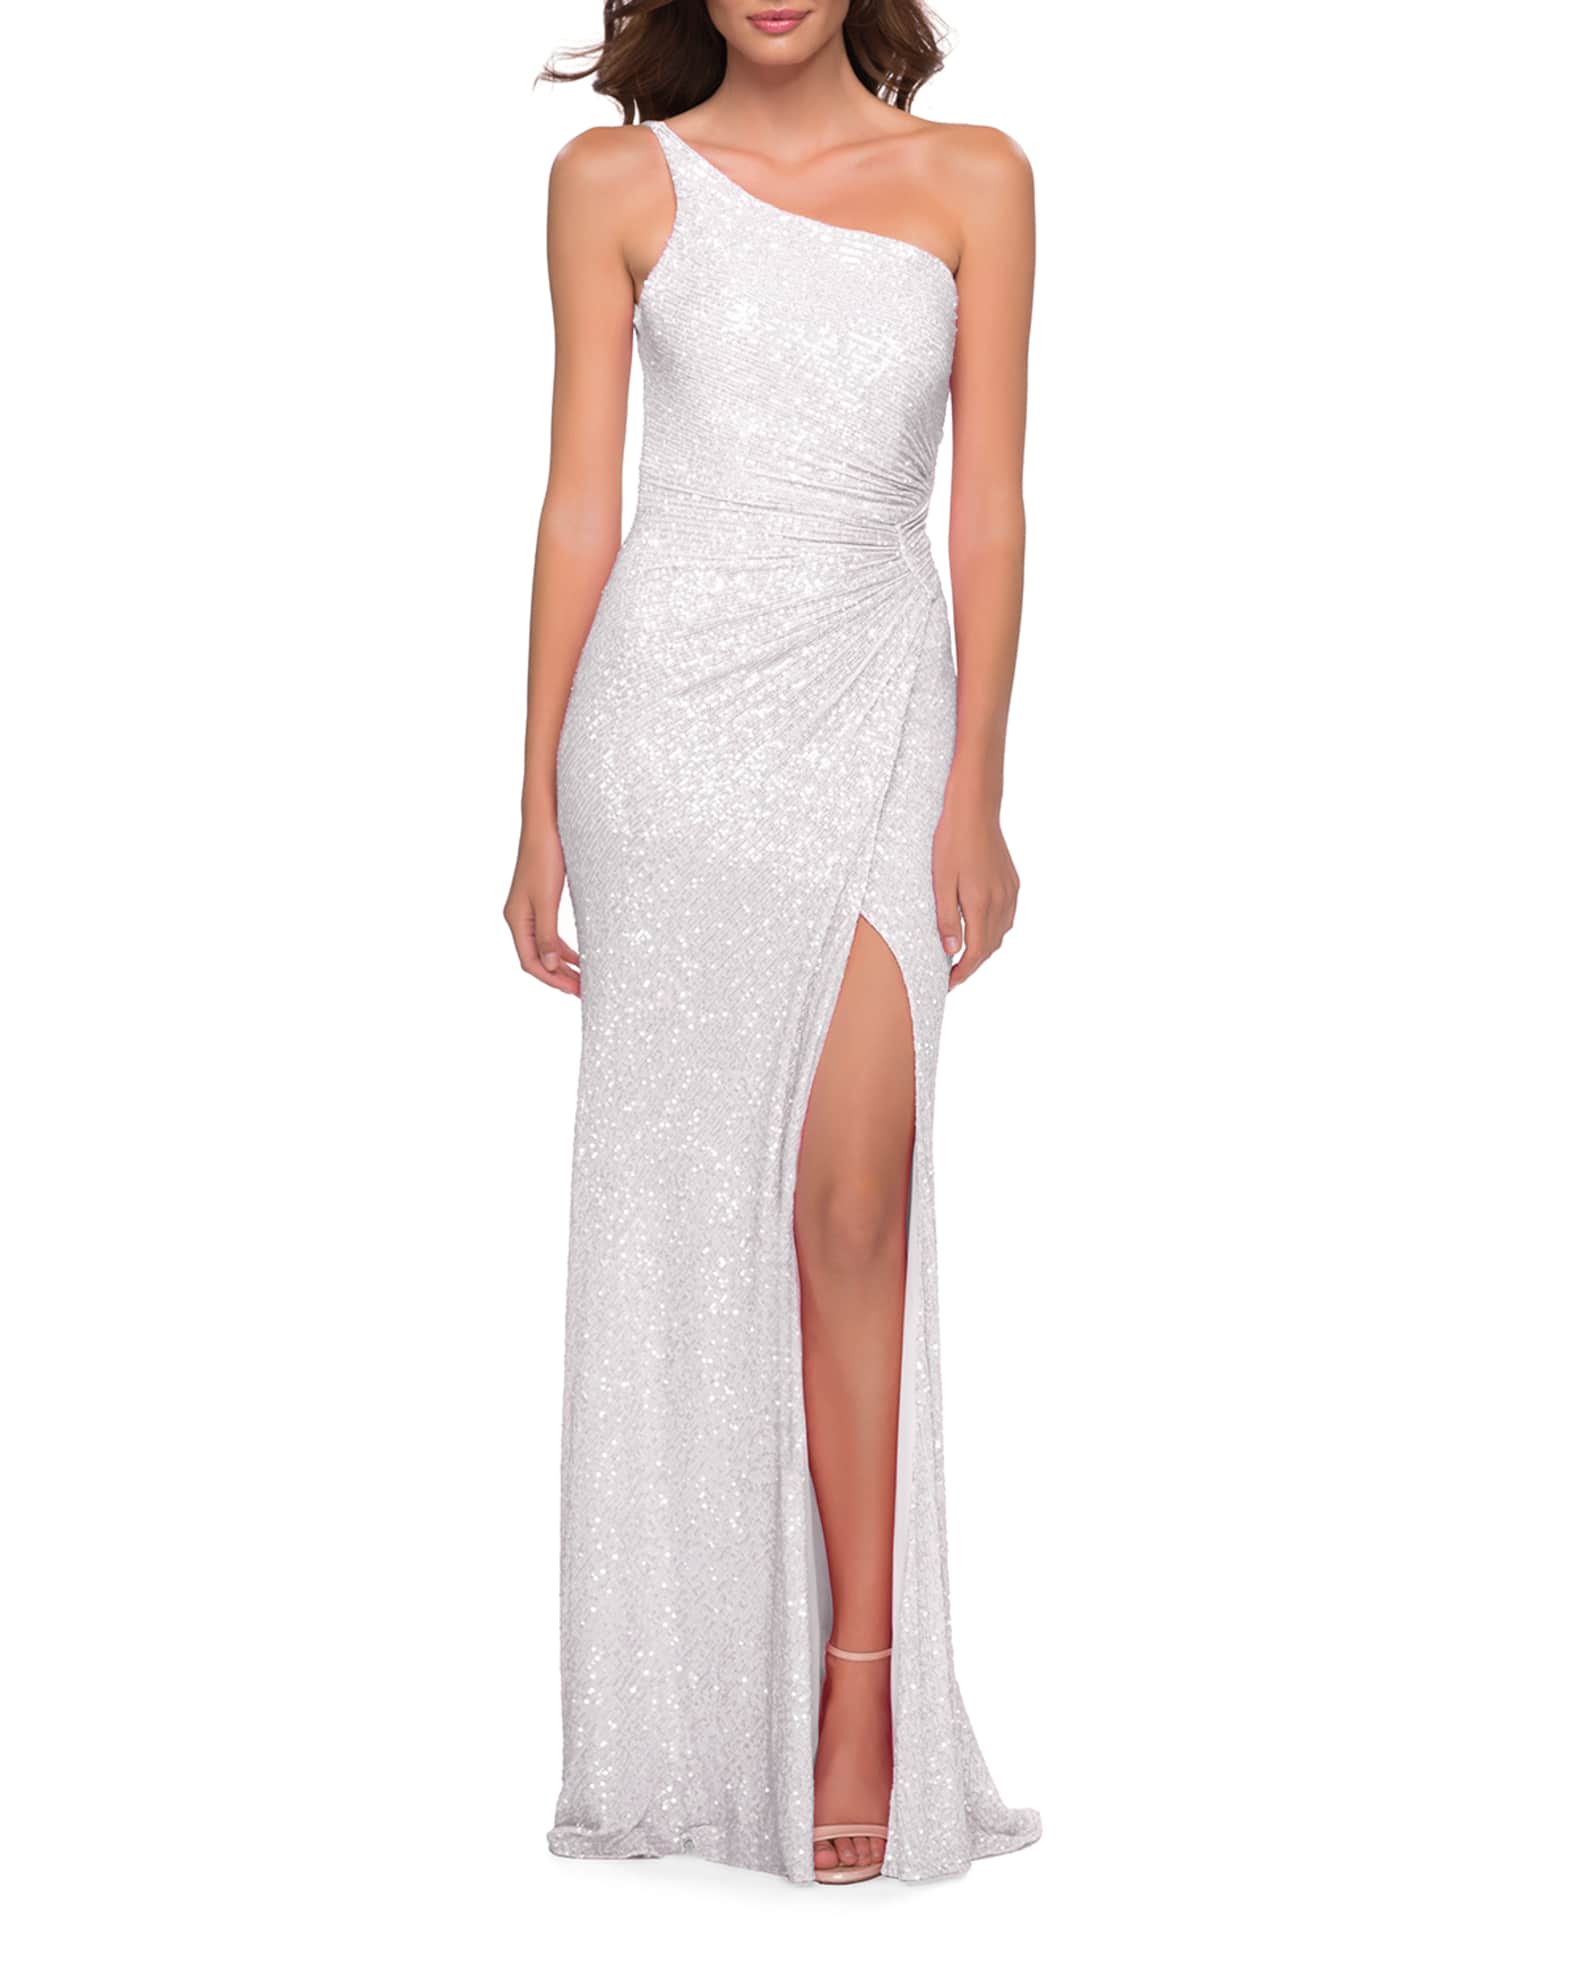 La Femme One-Shoulder Sequined Ruched Gown with Open Back | Neiman Marcus